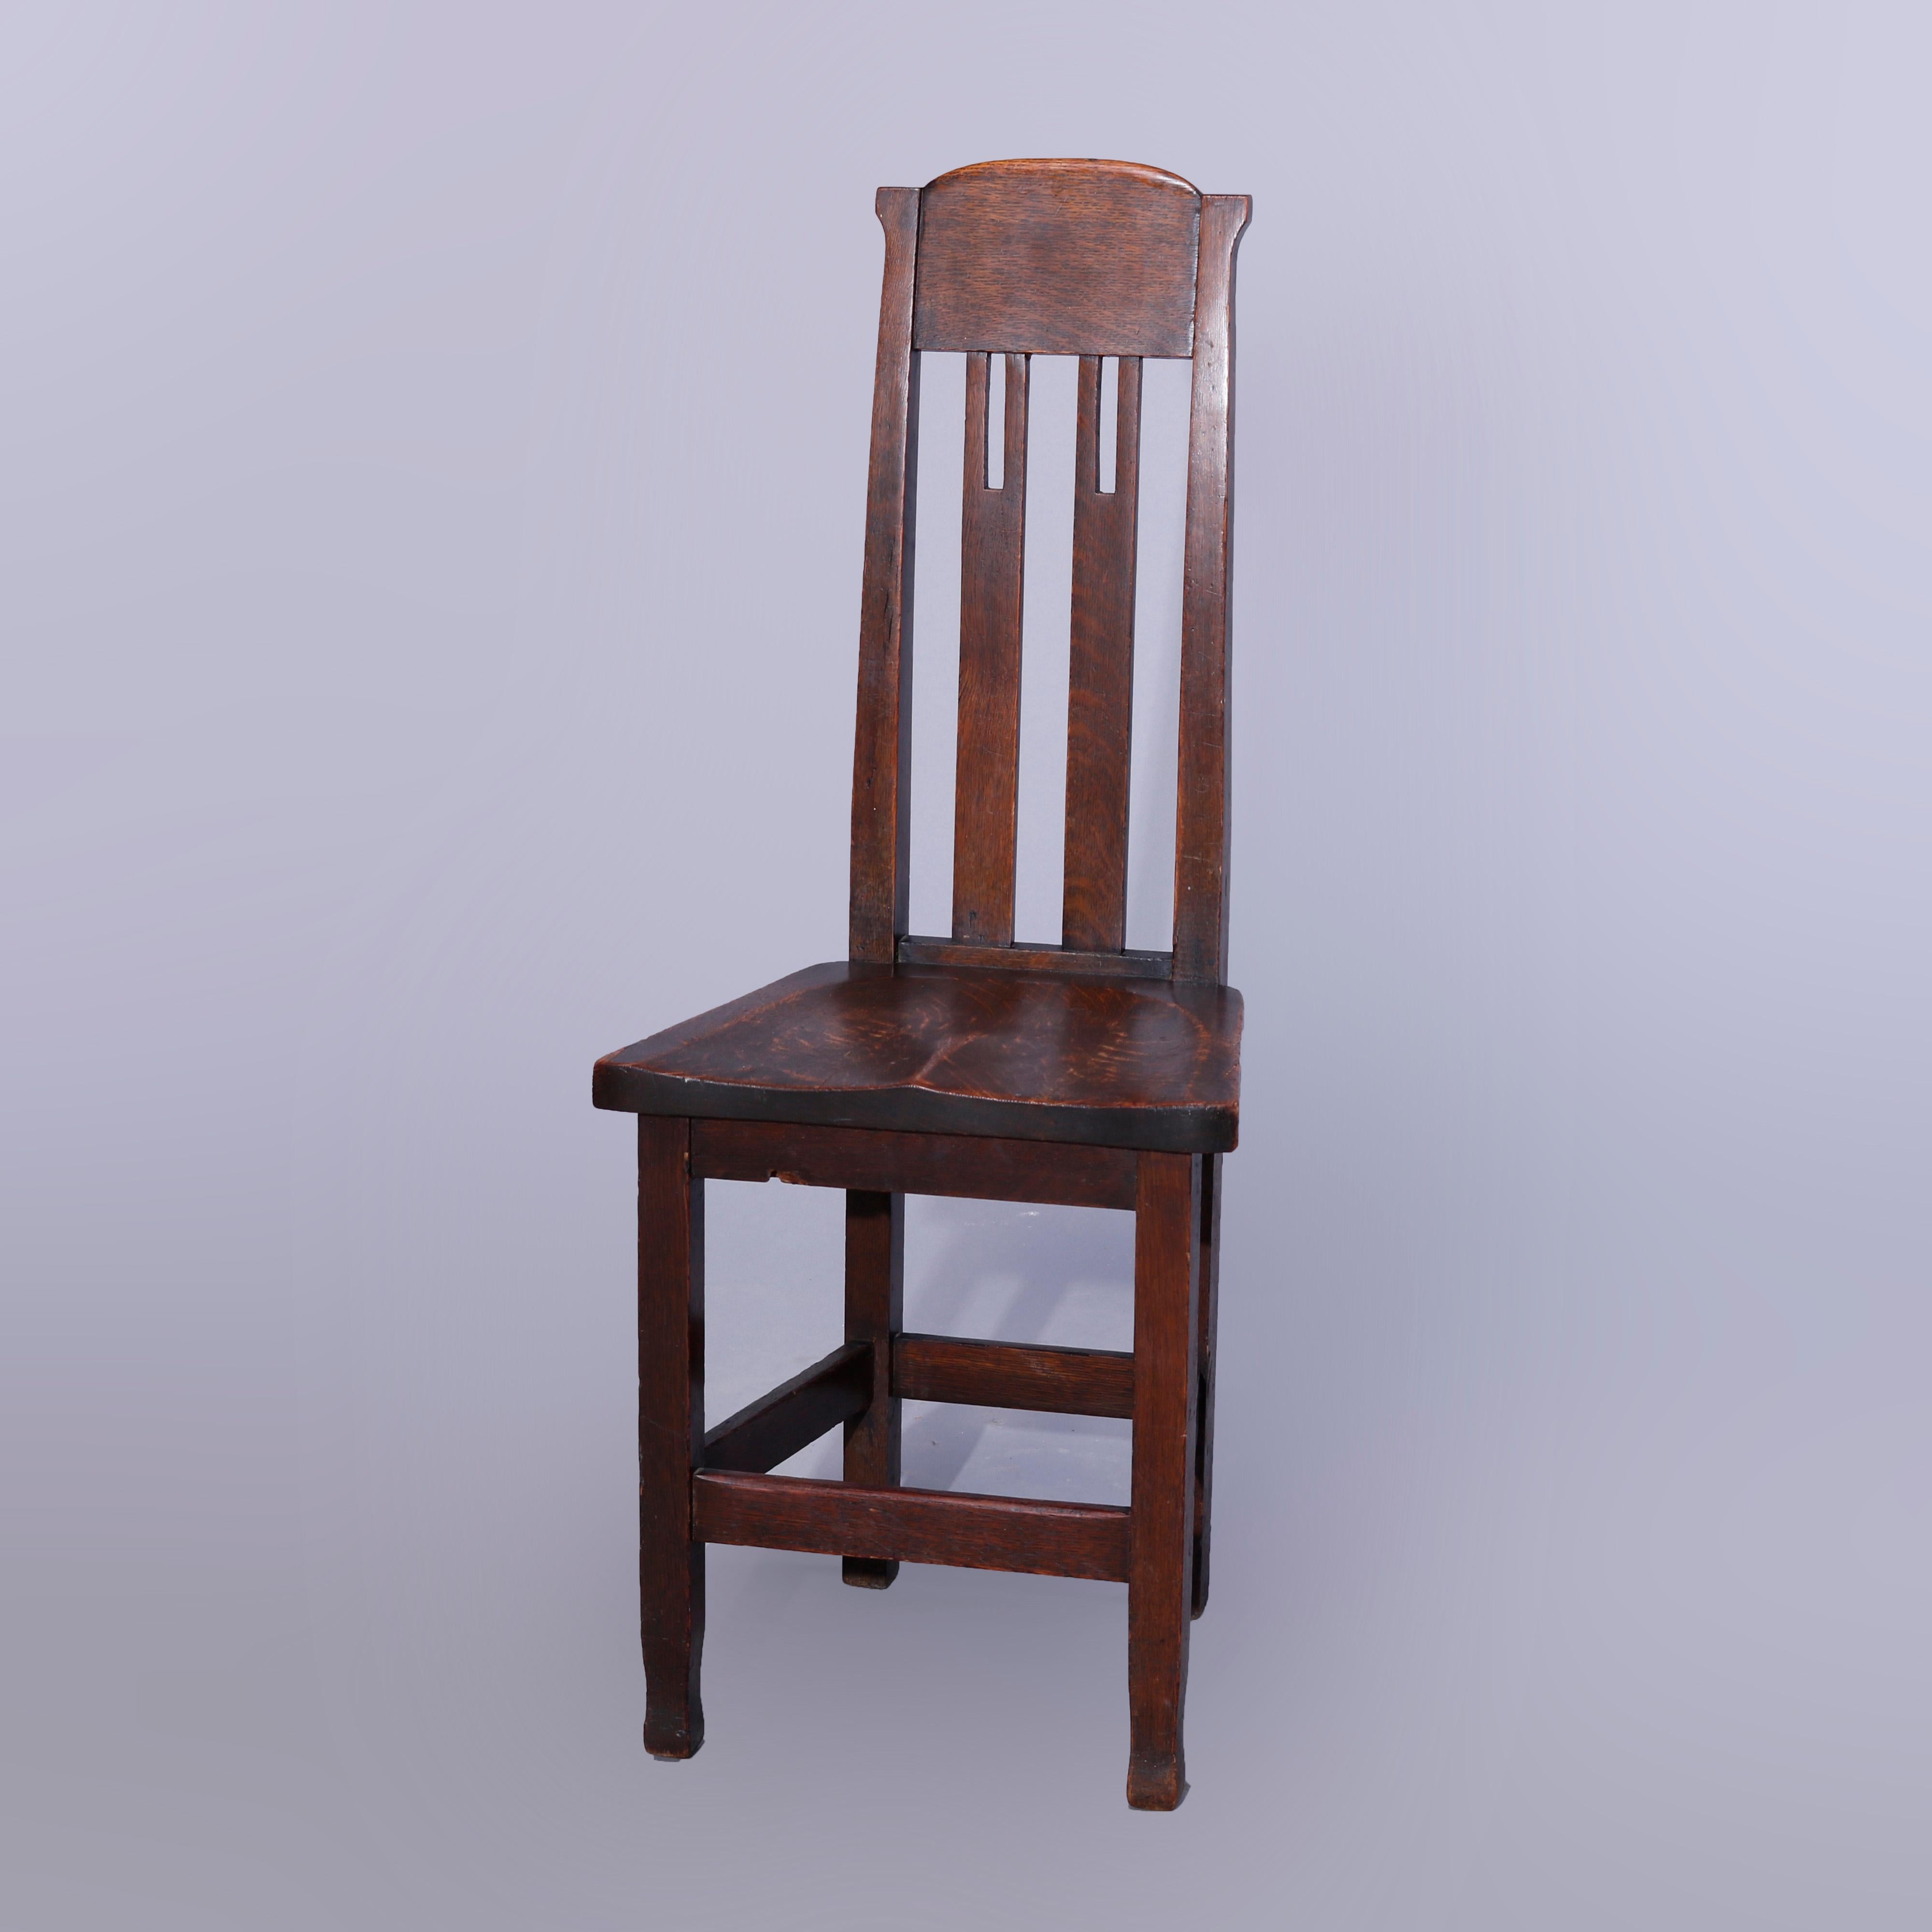 An antique Arts & Crafts Mission side chair in the manner of Stickley Bros. offers quarter sawn oak construction with tall slat back having cut-outs and over shaped seat, raised on straight legs terminating in McMurdo feet, c1910
 
Measures -